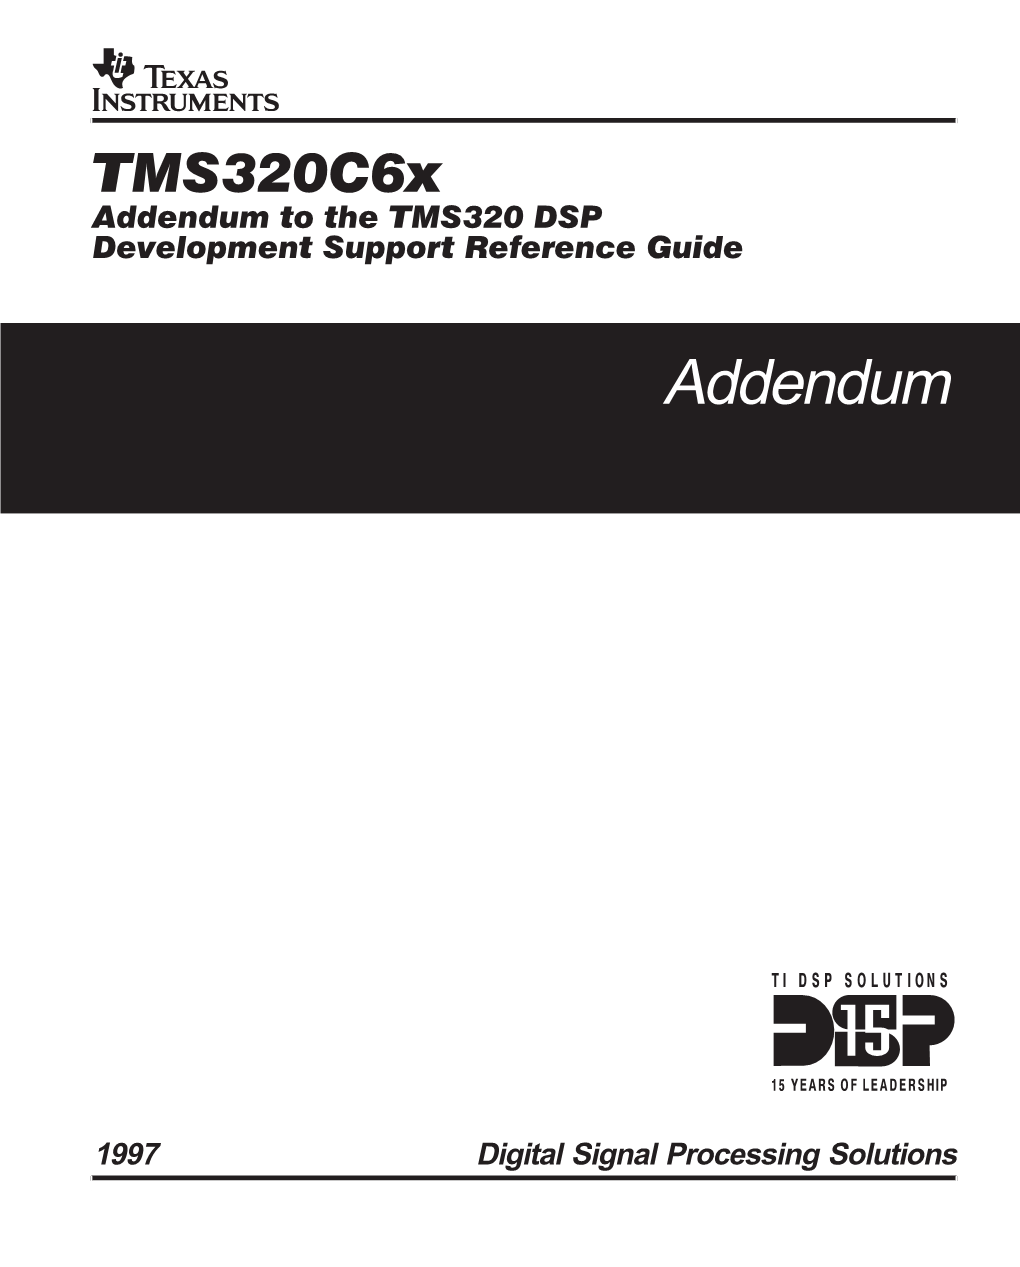 Tms320c6x Addendum to the TMS320 DSP Development Support Reference Guide